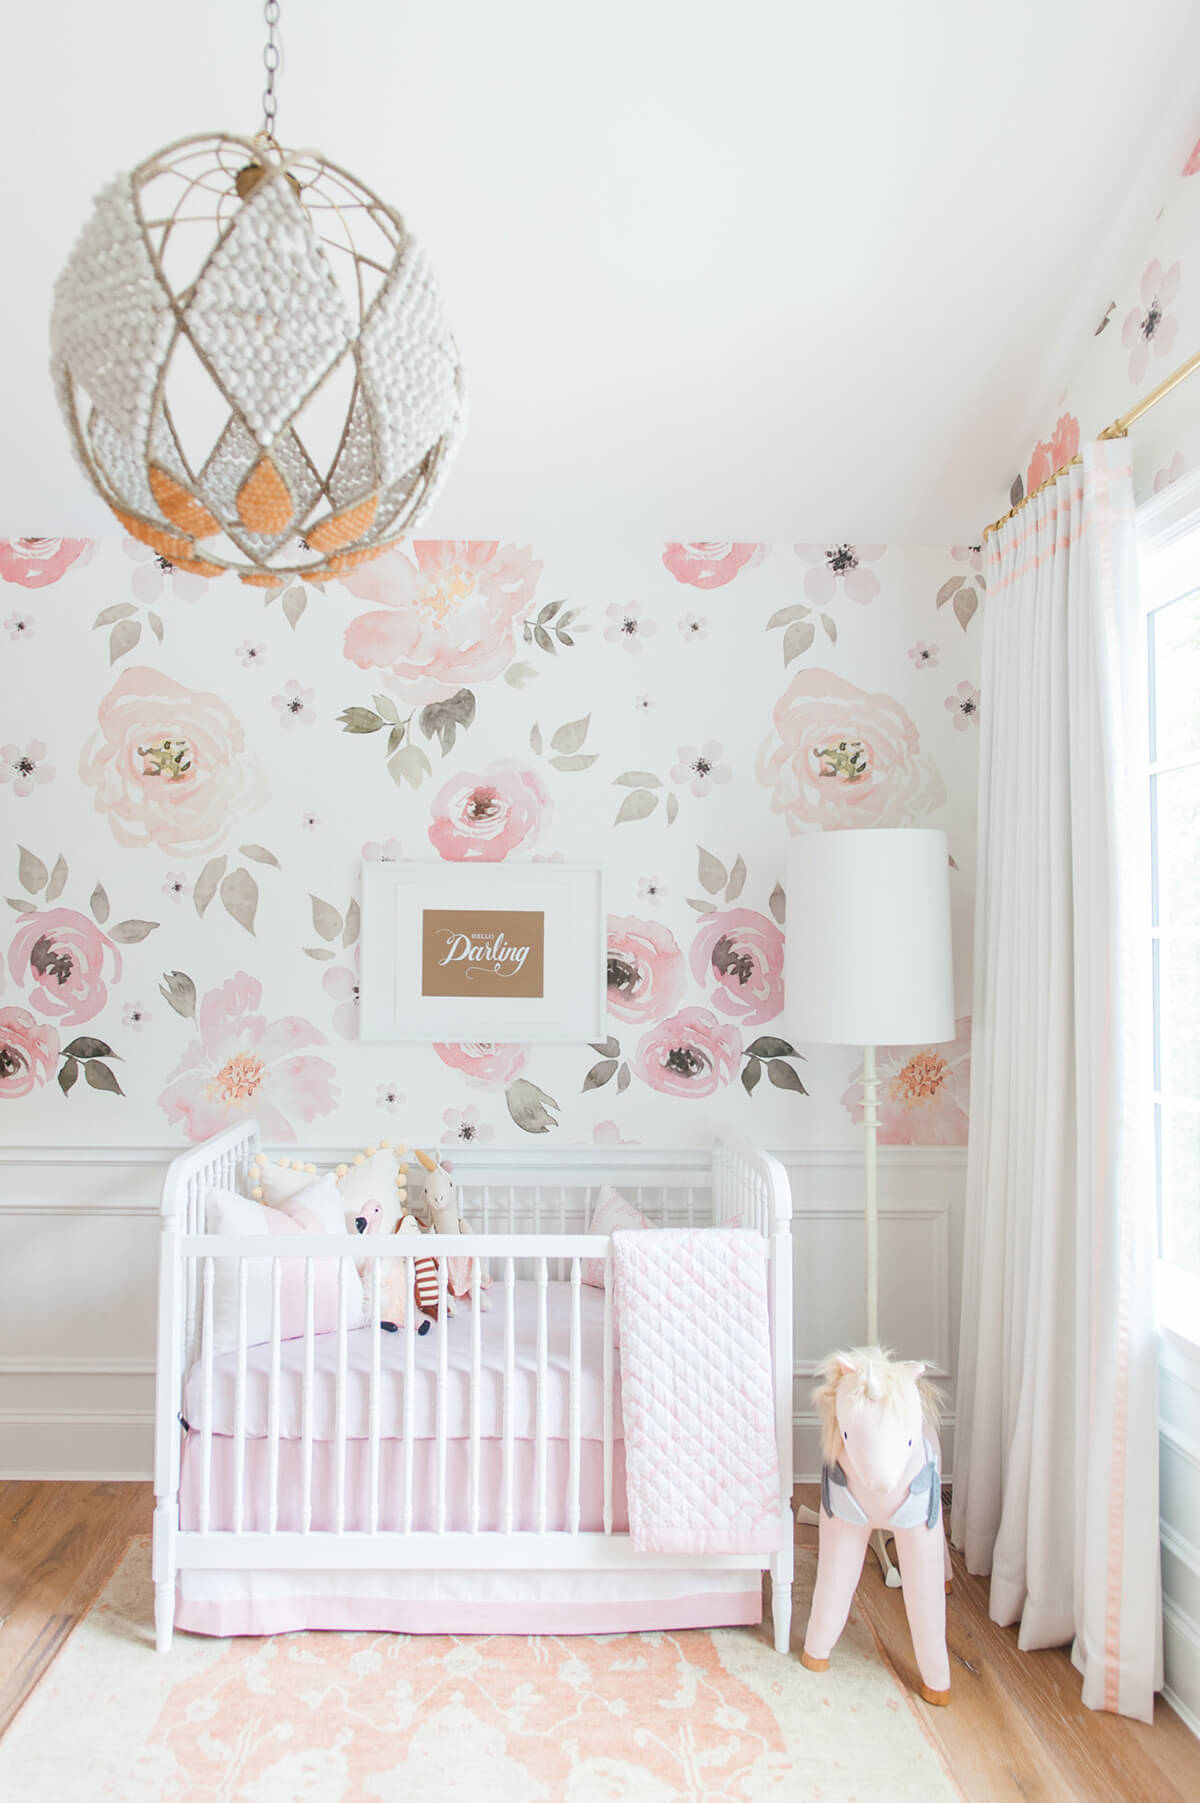 Consider Wall Coverings that Grow with Baby